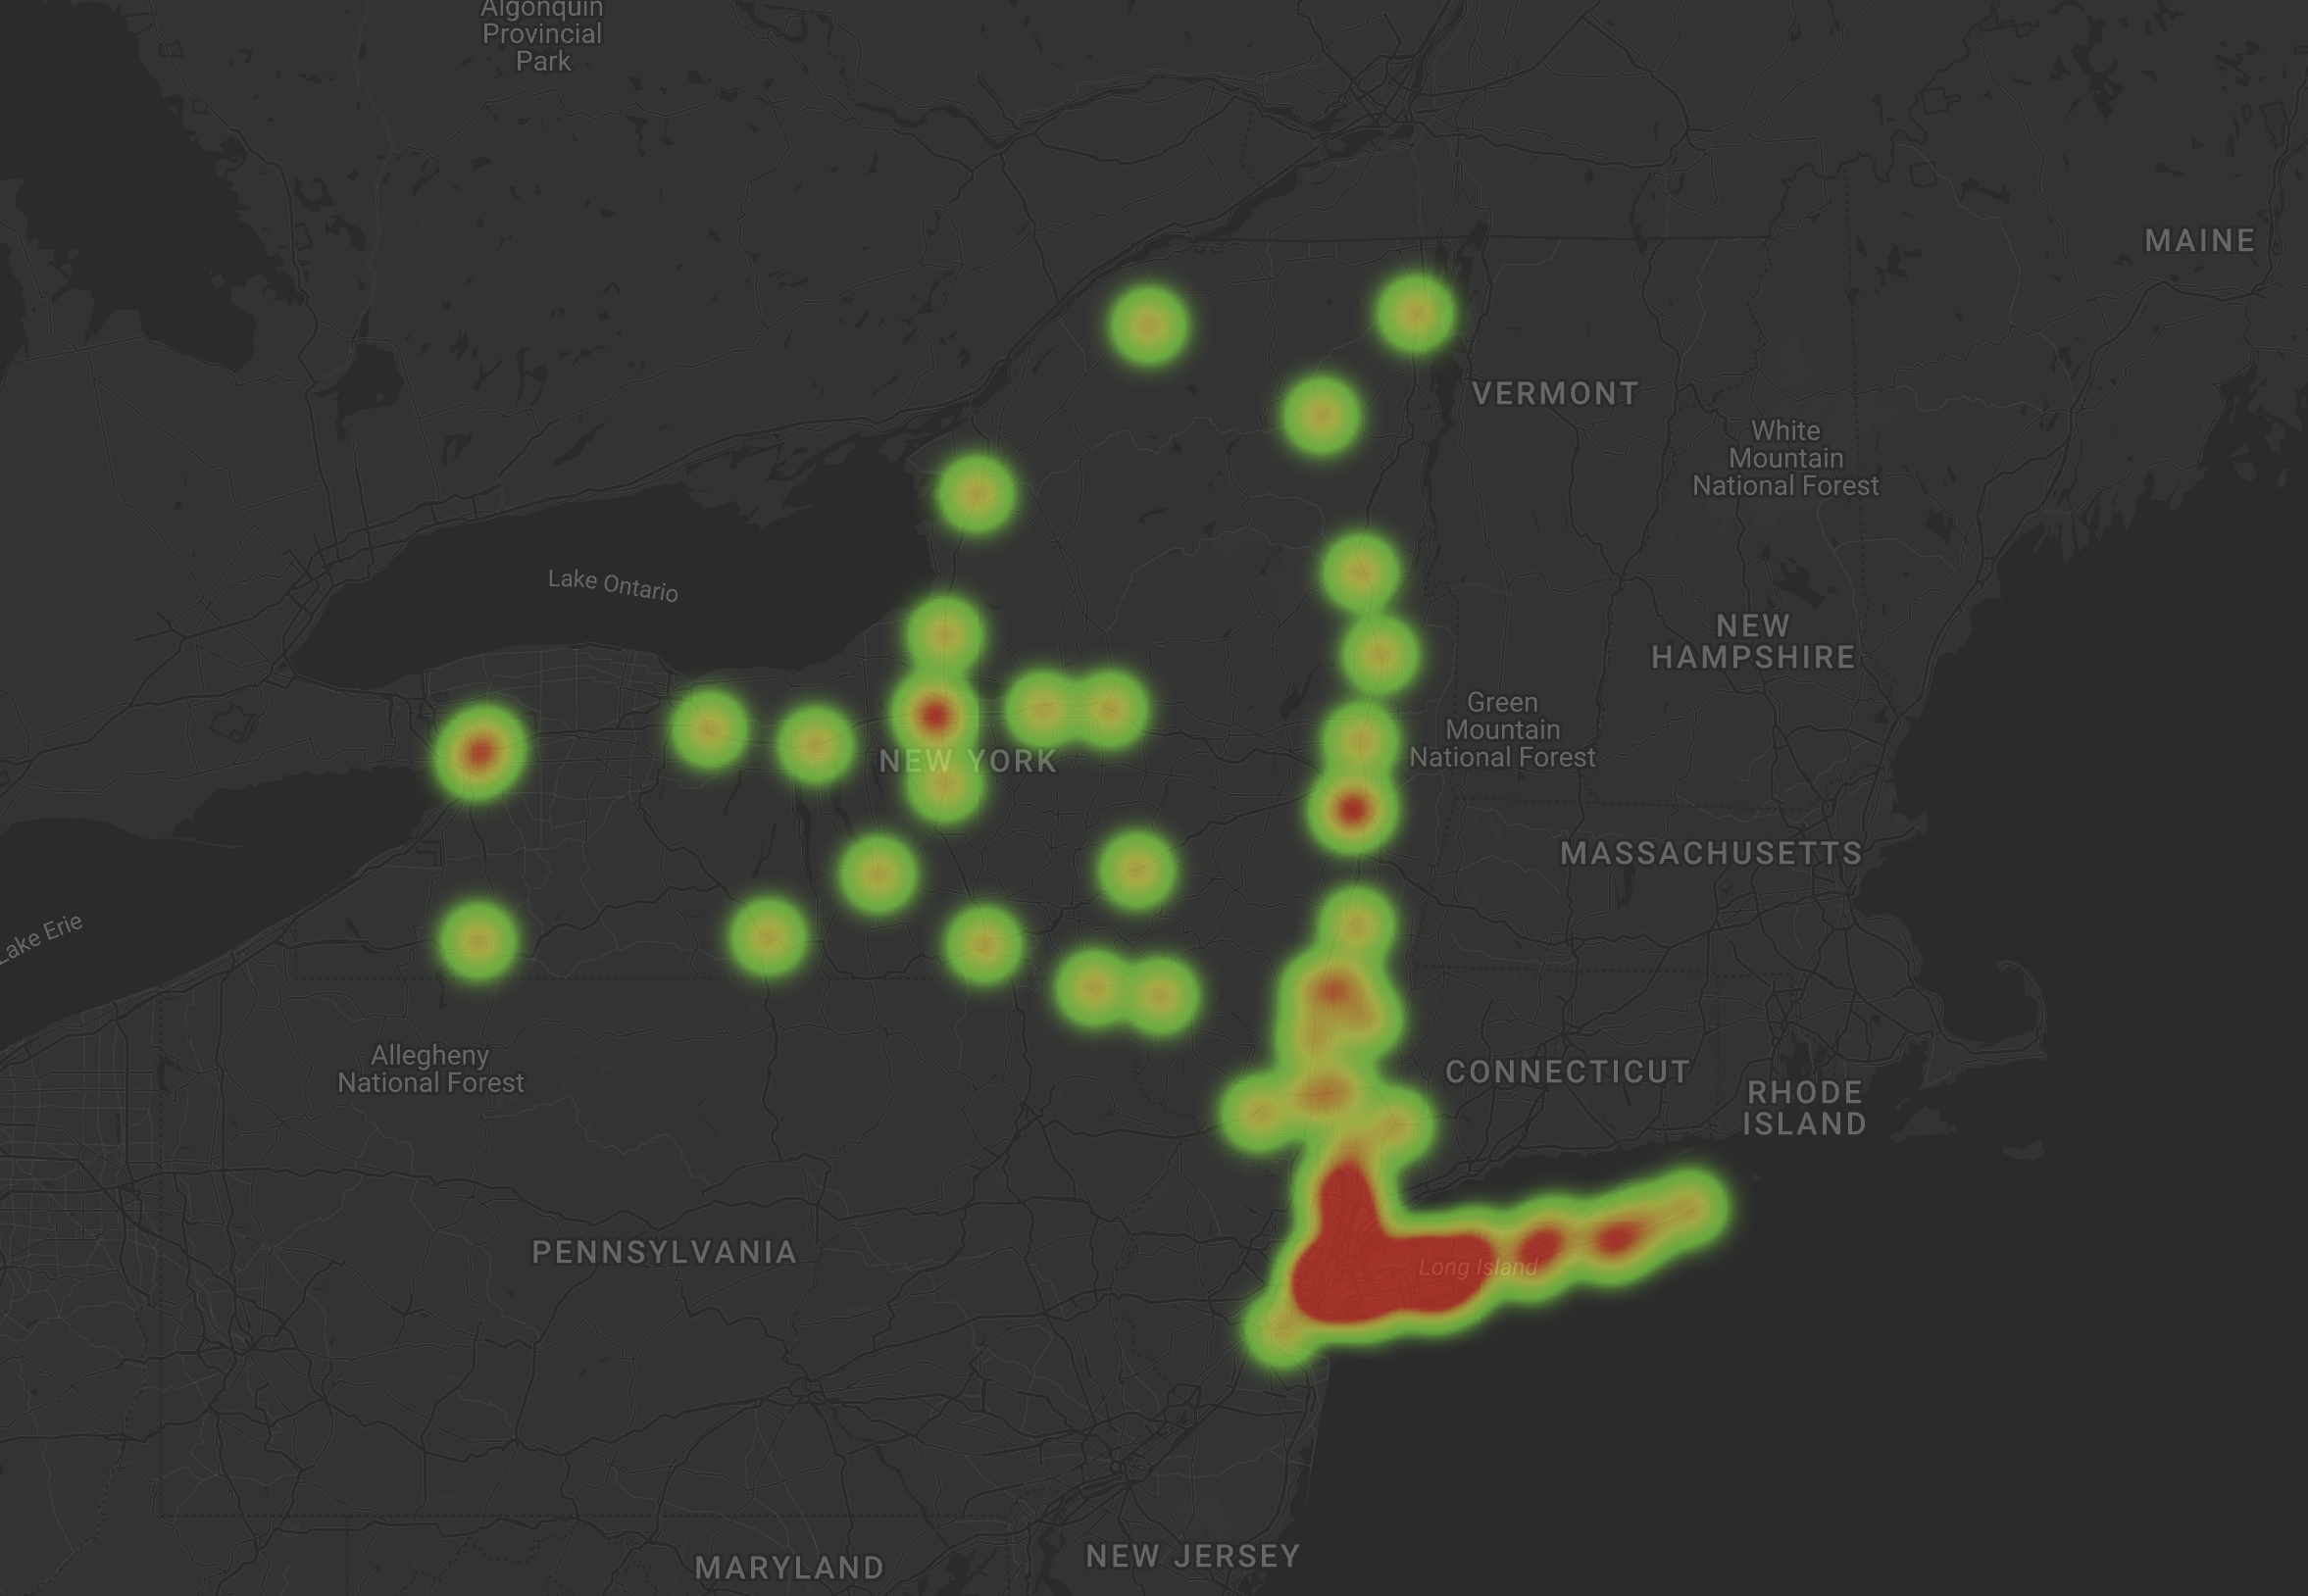 Example of a Mapize map with multiple locations featuring a heat map on a dark background.